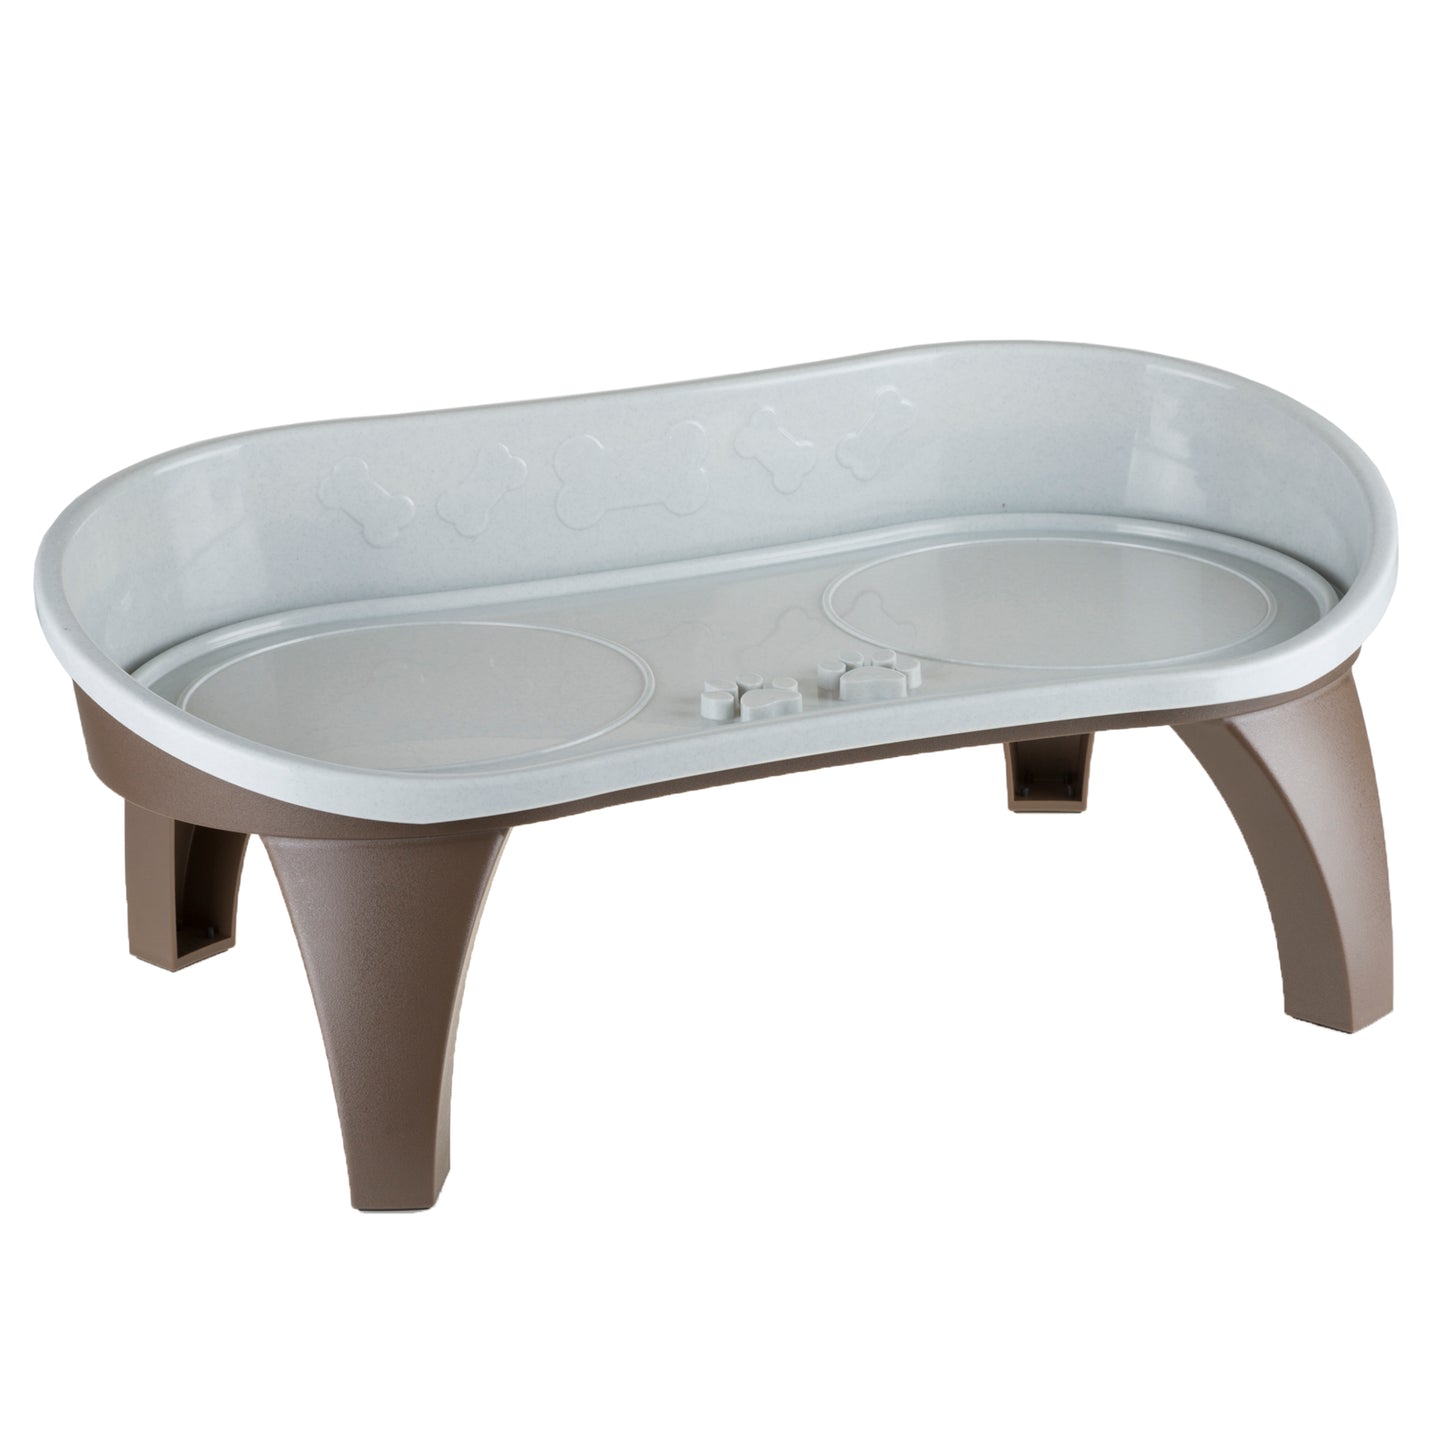 PETMAKER 8.5-Inch-Tall Dog Bowl Stand, Brown